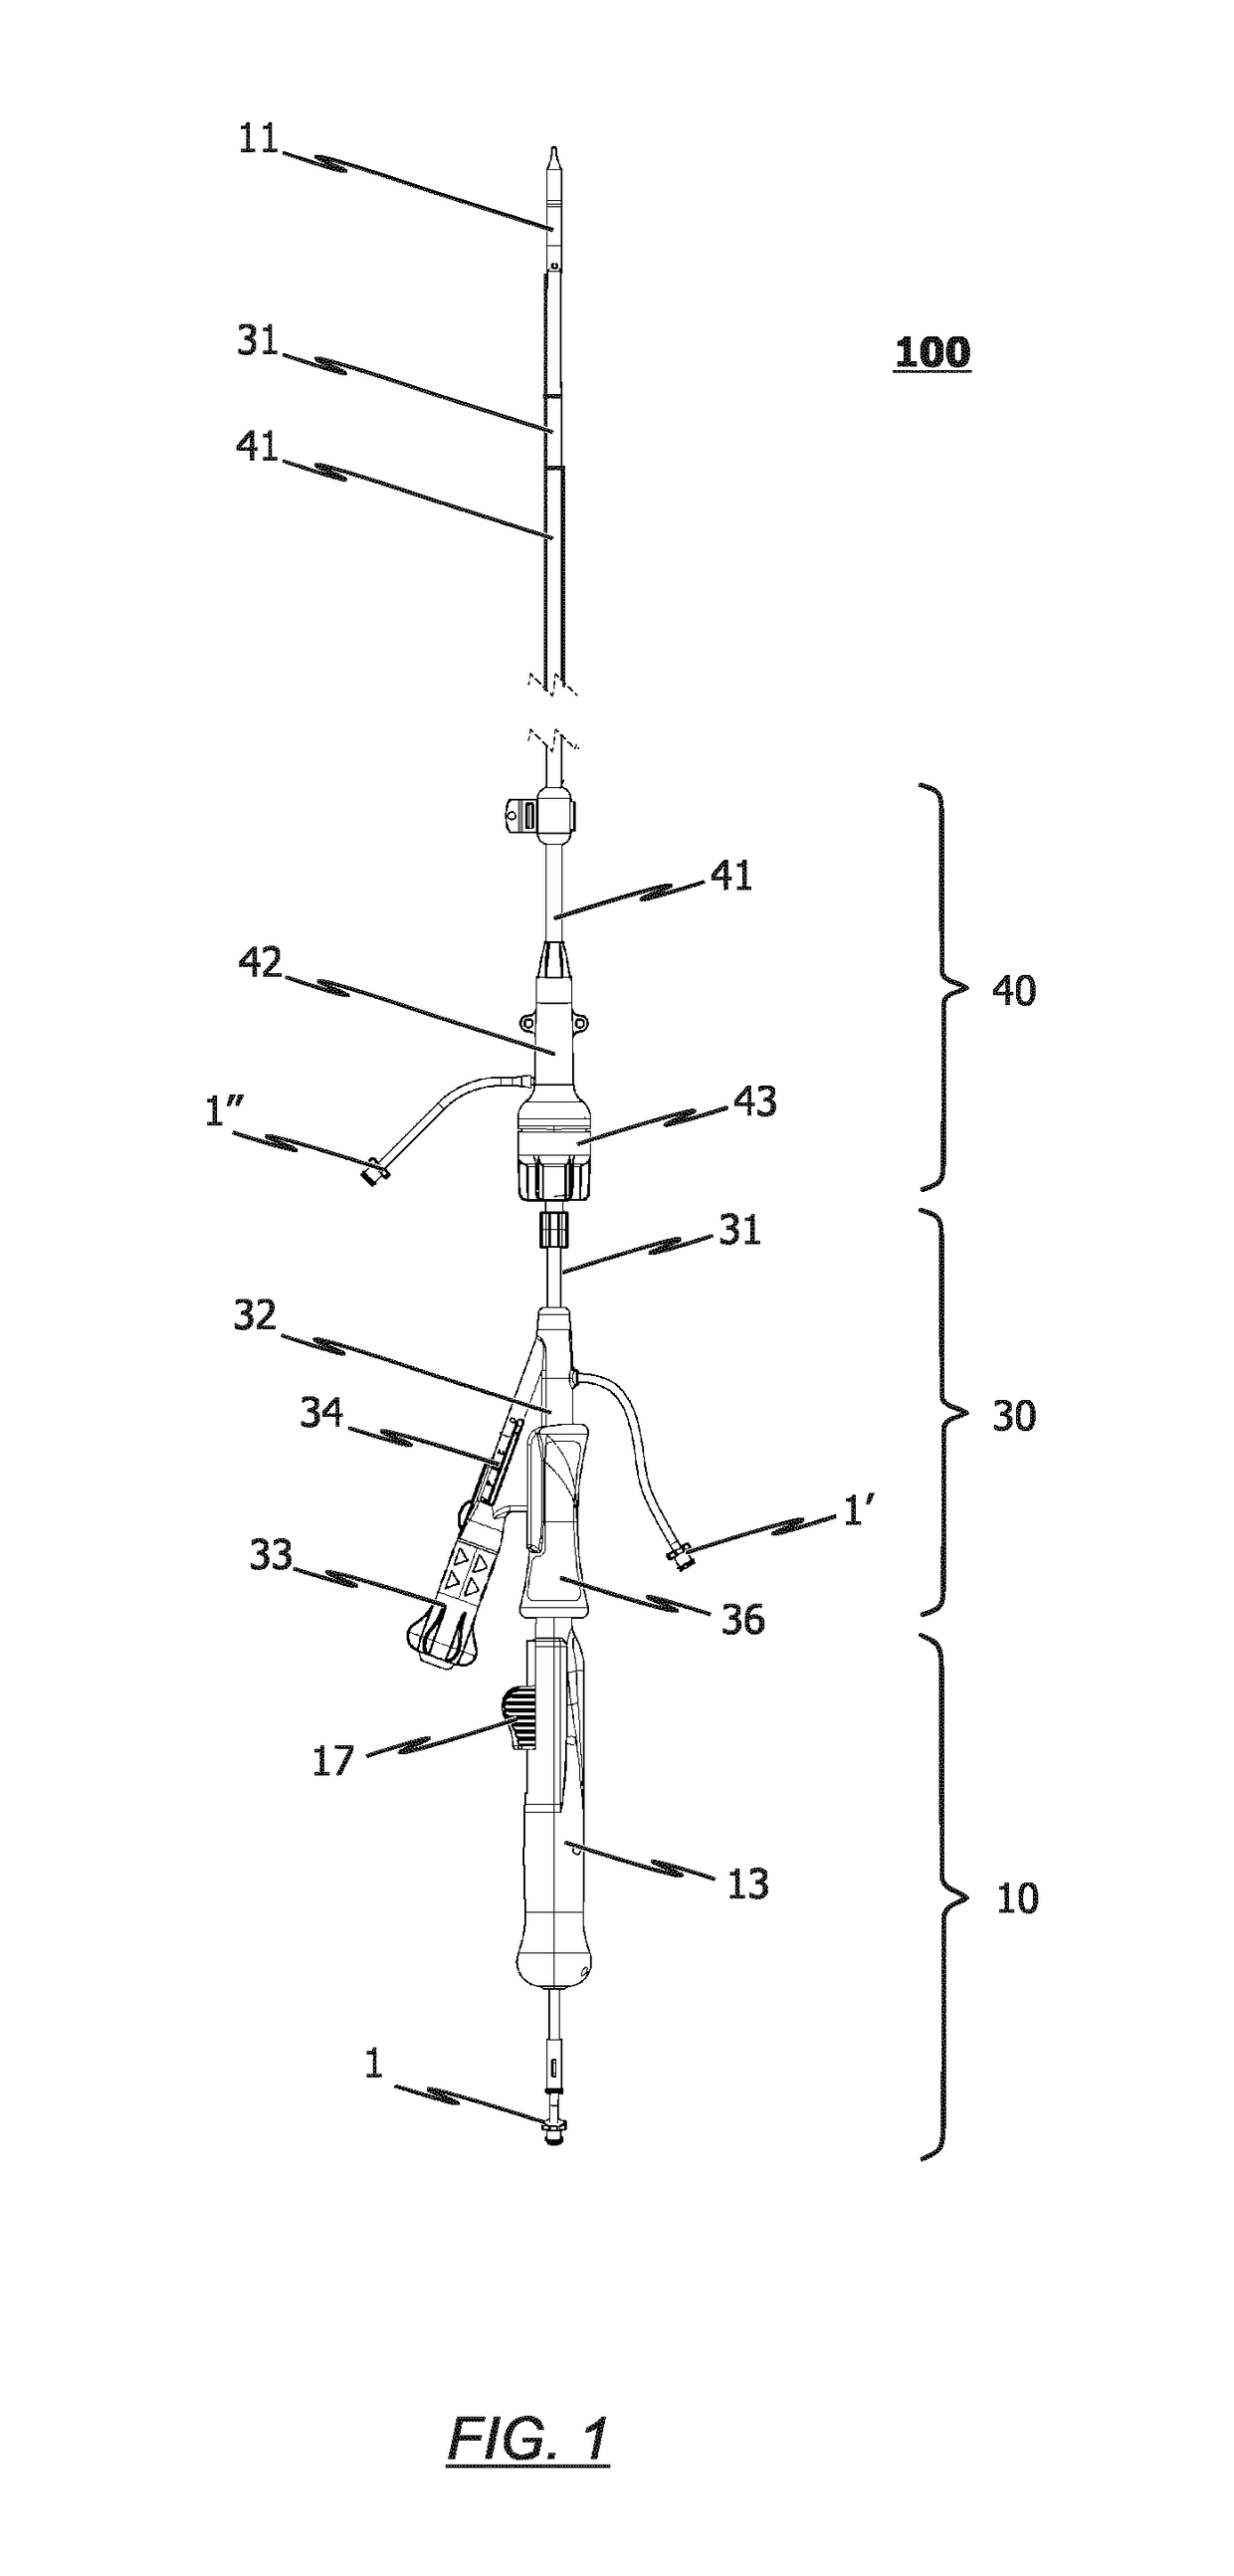 Heart valve prosthesis delivery system and method for delivery of heart valve prosthesis with introducer sheath